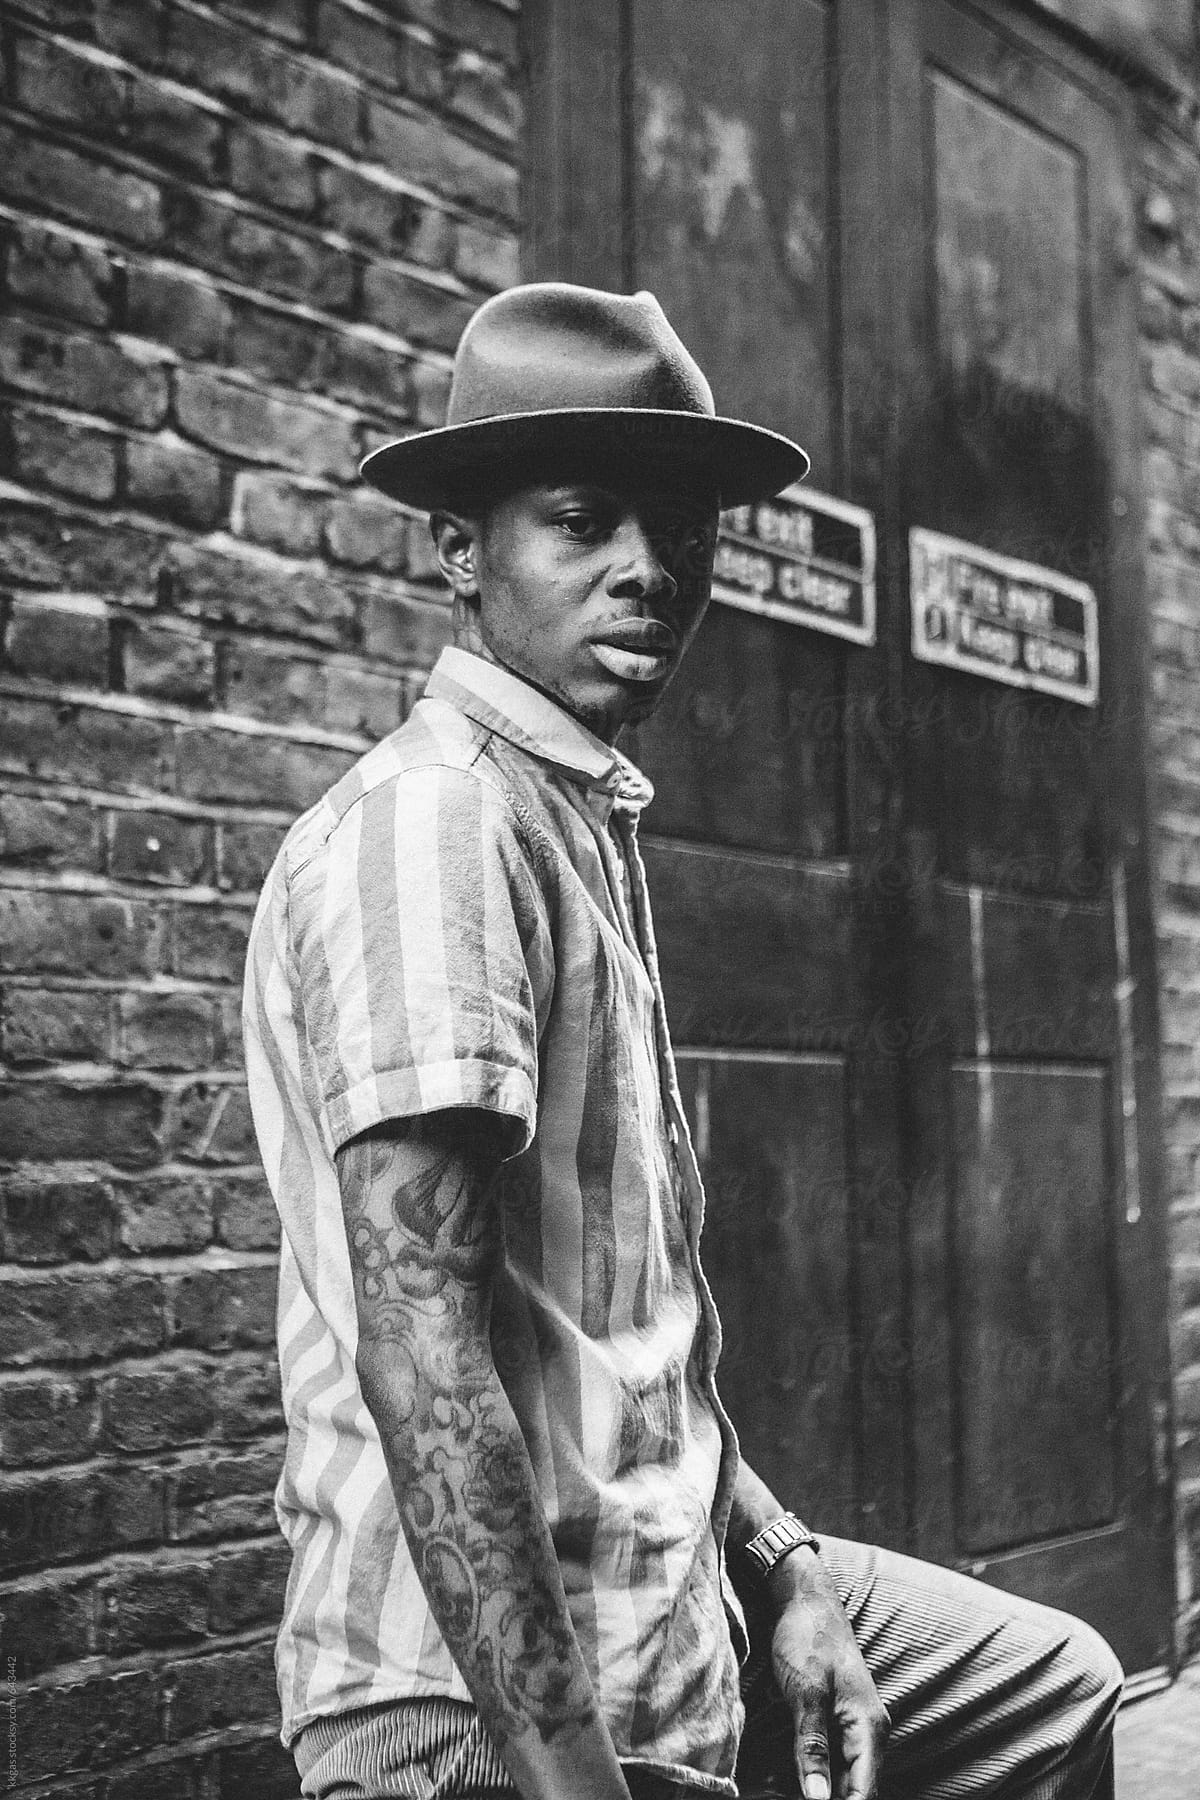 Stylish young black man with tattoos in an urban setting